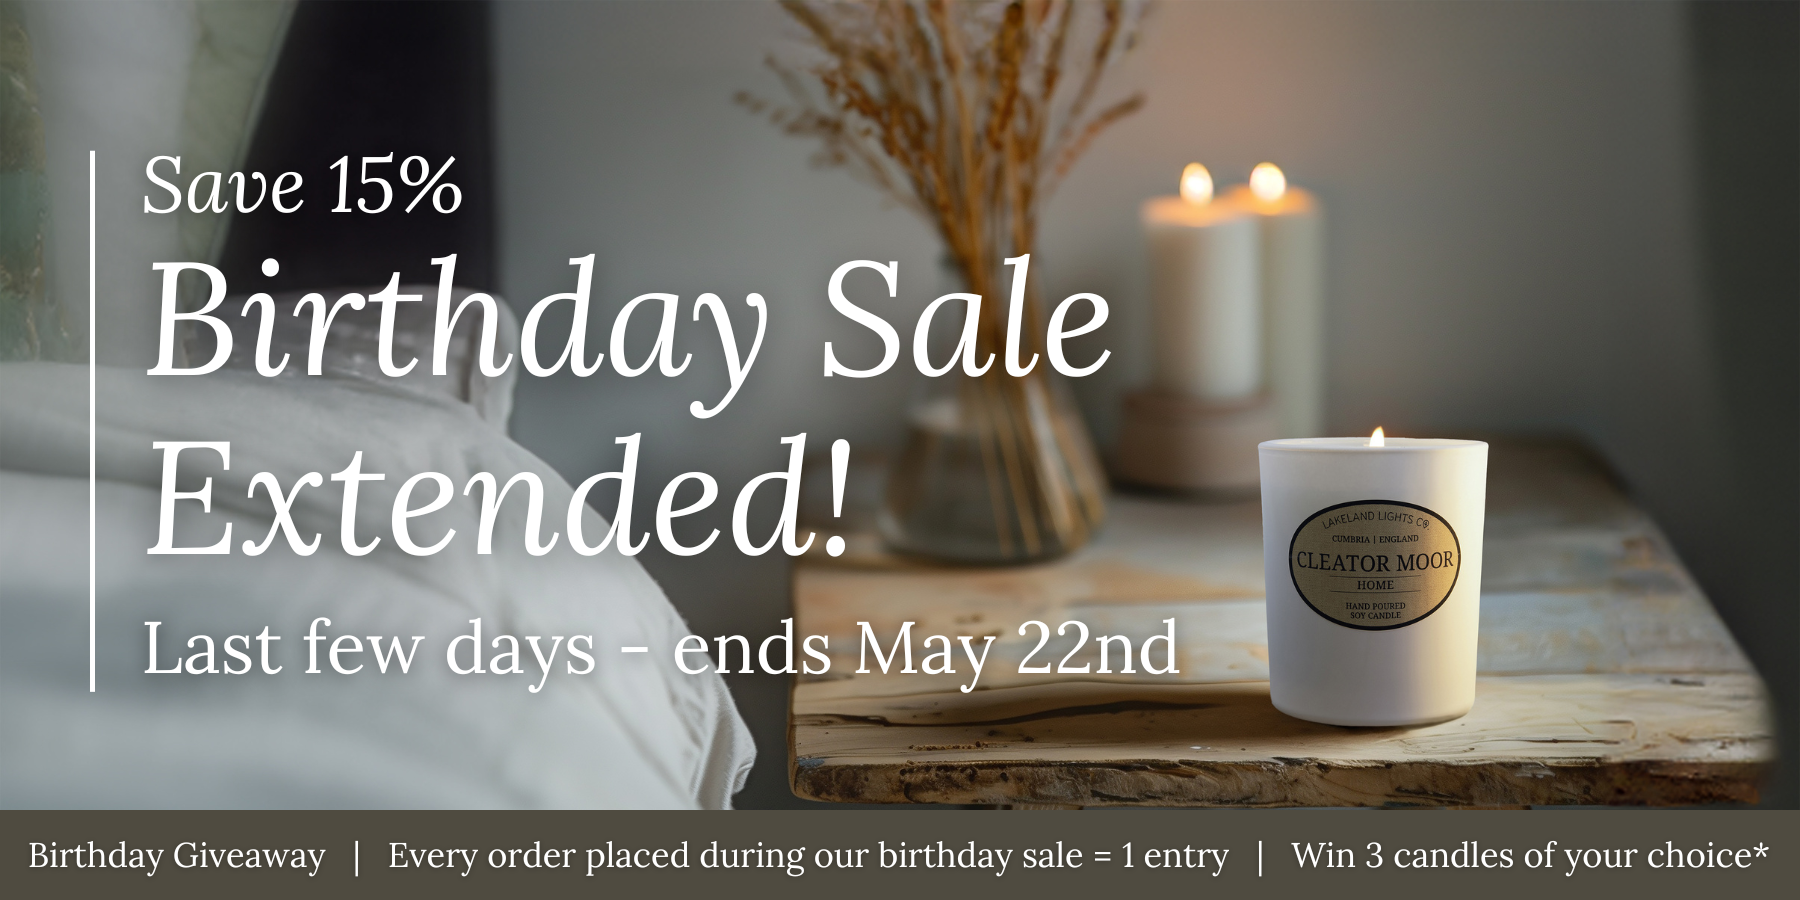 Our 5th Birthday Sale & Giveaway!